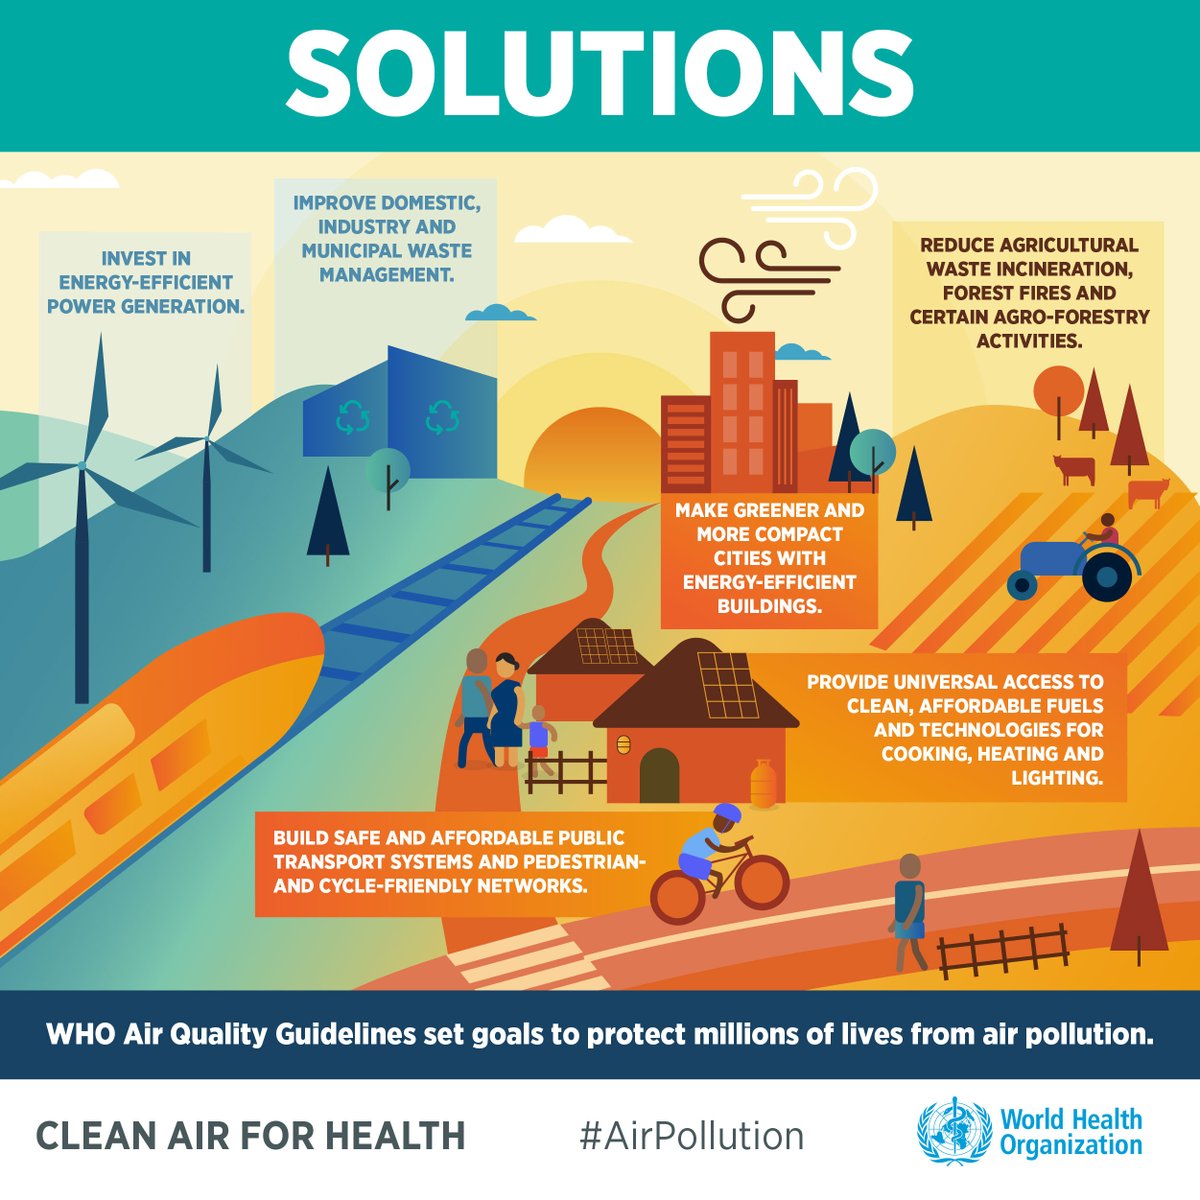 The goal of these guidelines is for all countries to achieve recommended air quality levels & save lives. Governments, corporations, civil society & individuals can take action to ↘️ #AirPollution. The solutions for transformative changes exist! 👉 bit.ly/3EMJ6Ob